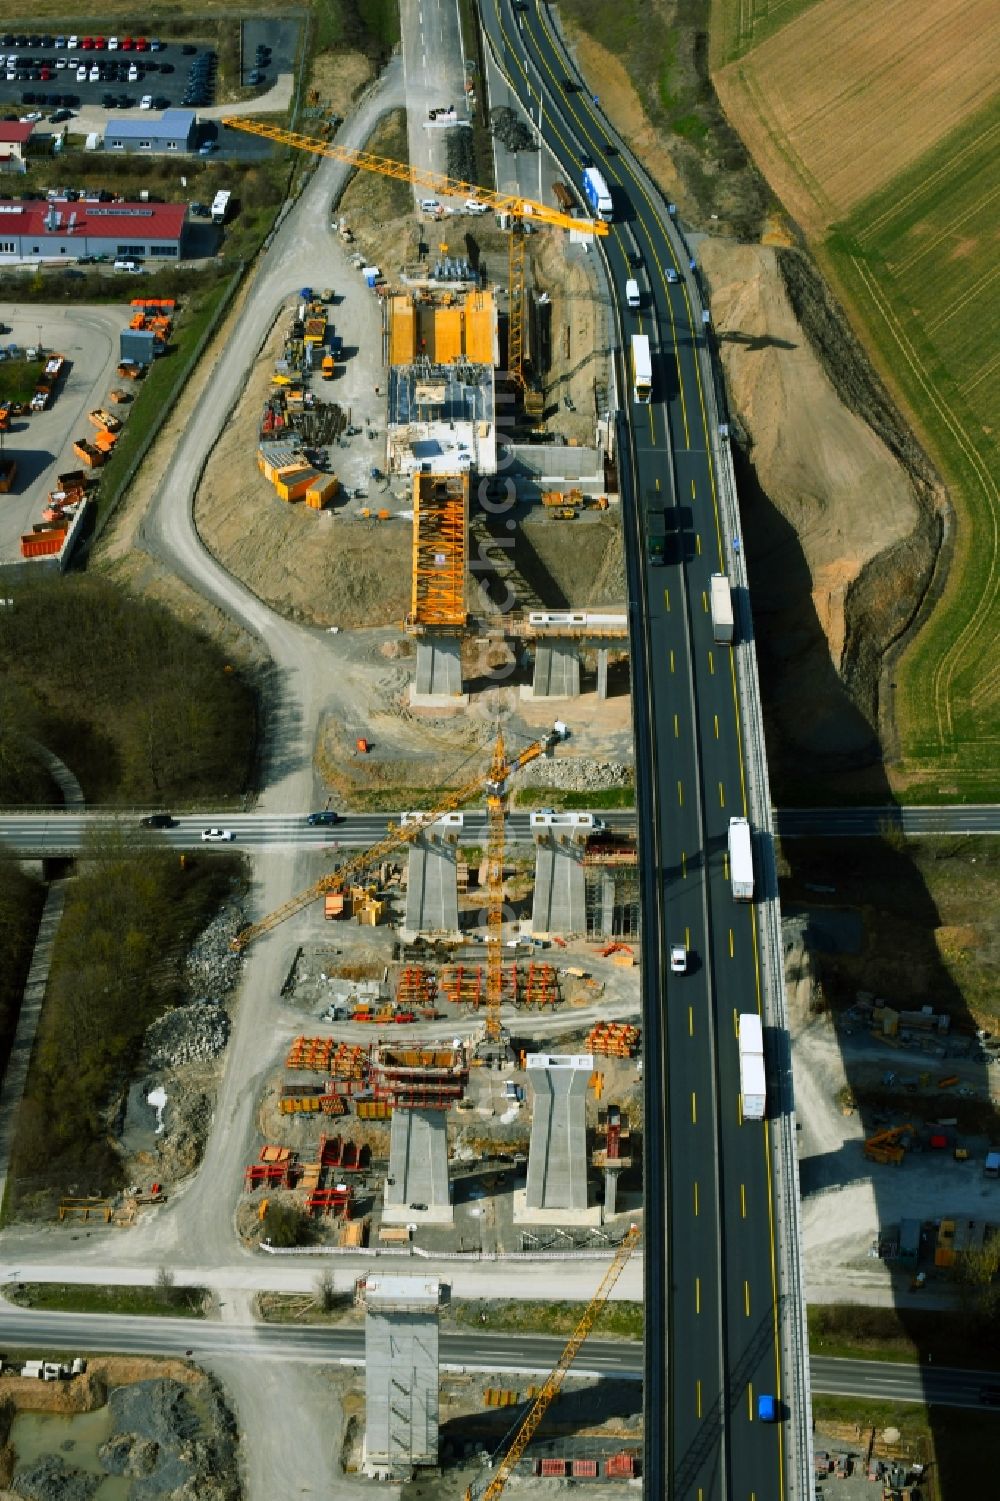 Aerial image Kürnach - Construction site for the new building of Routing and traffic lanes over the highway bridge Kuernachtalbruecke in the motorway A 7 in Kuernach in the state Bavaria, Germany